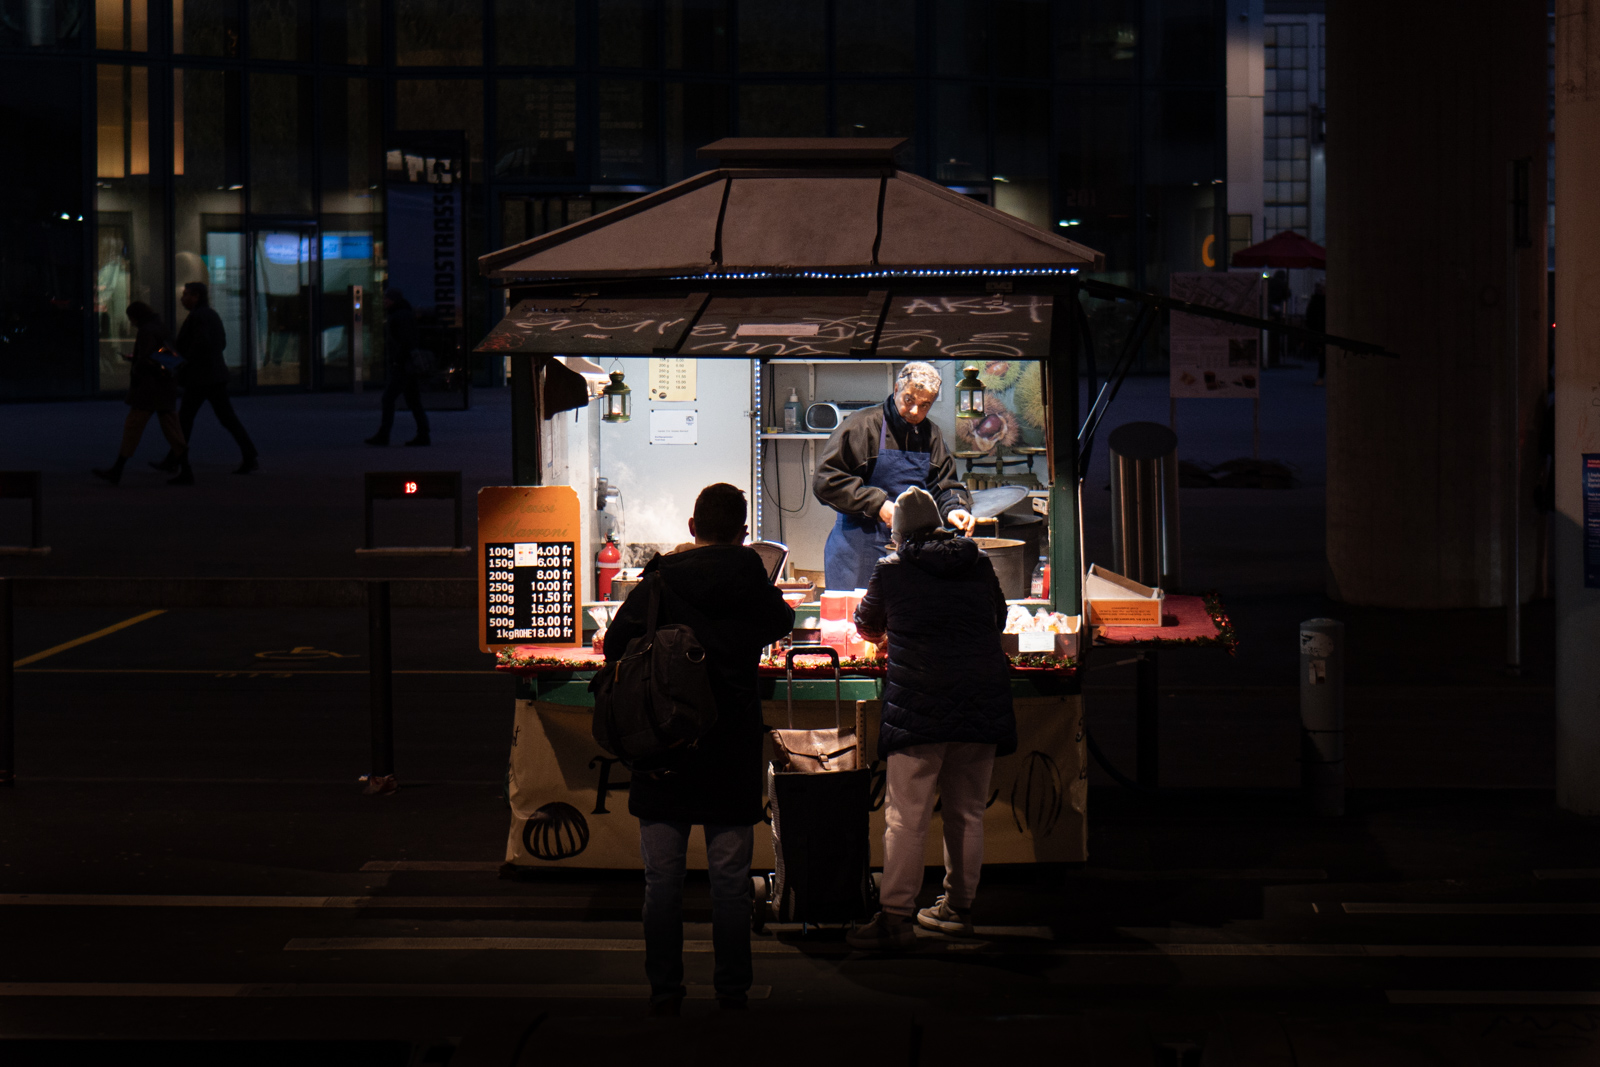 Read more about the article Streetfotografie in der Nacht